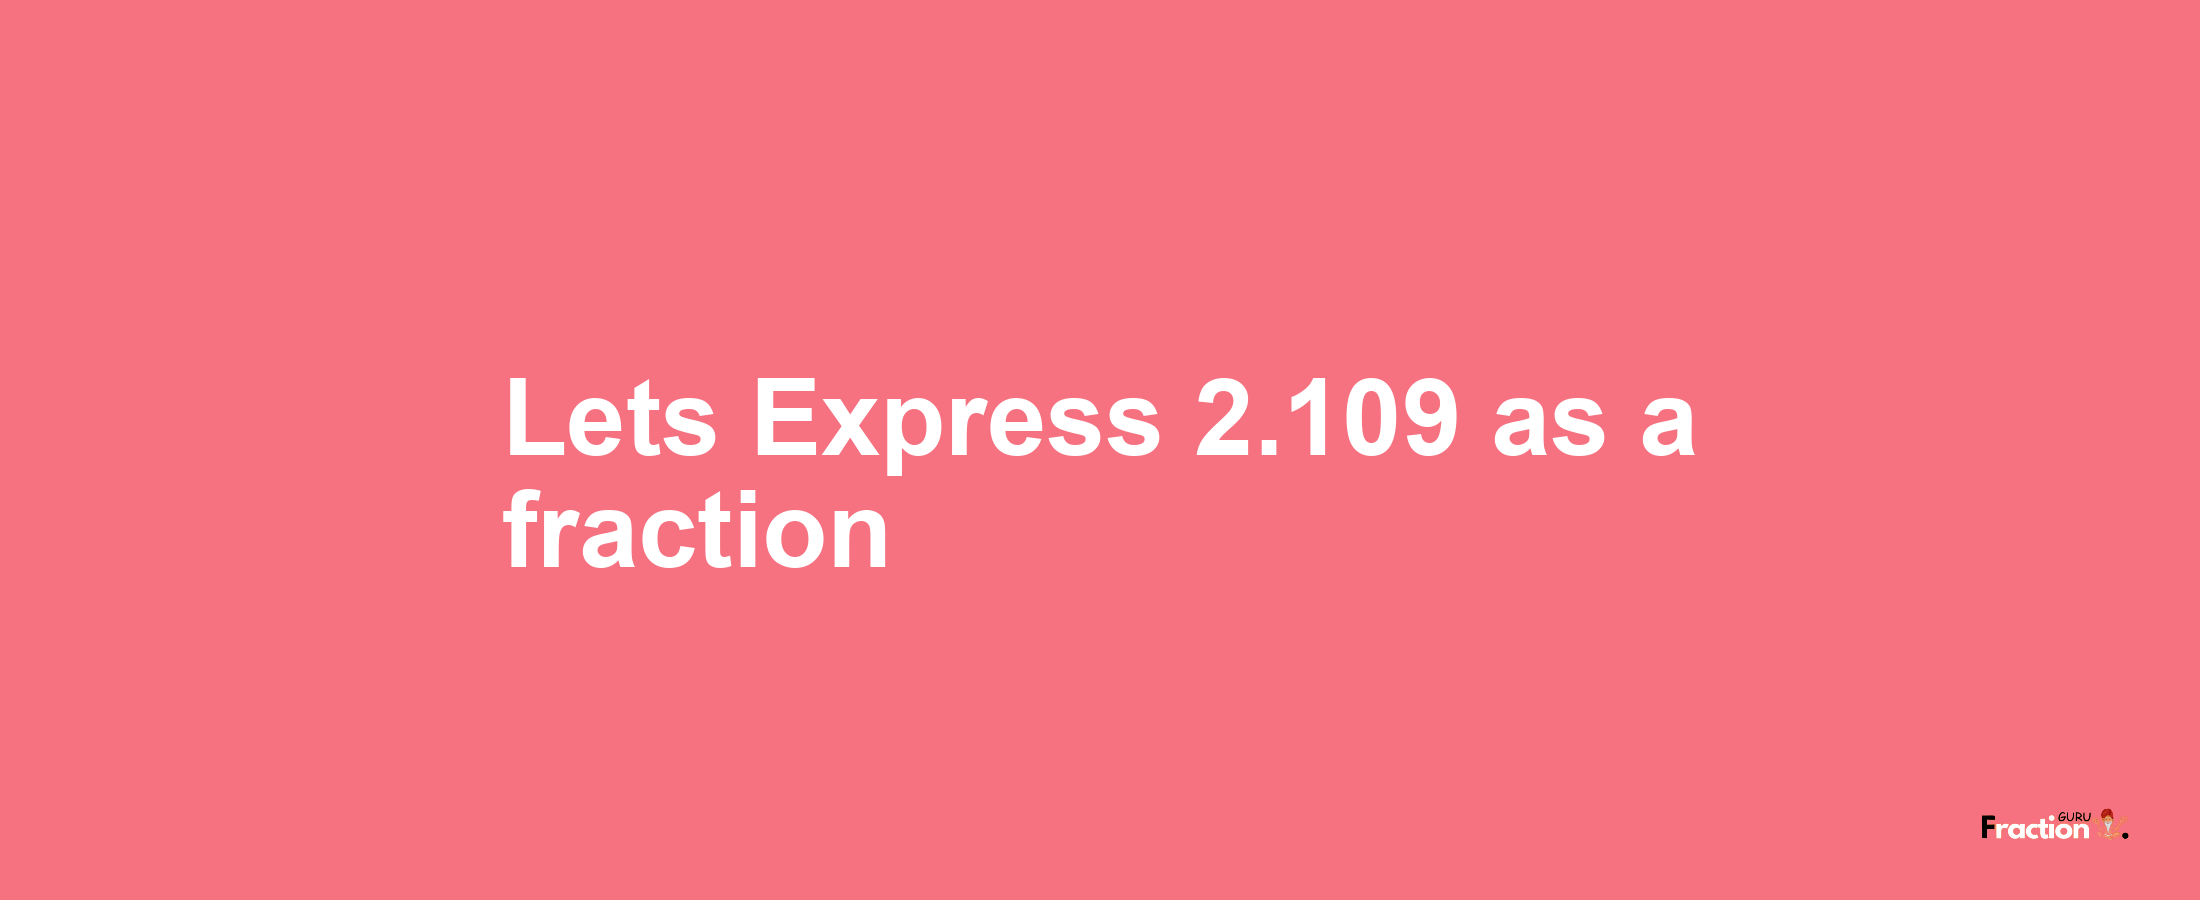 Lets Express 2.109 as afraction